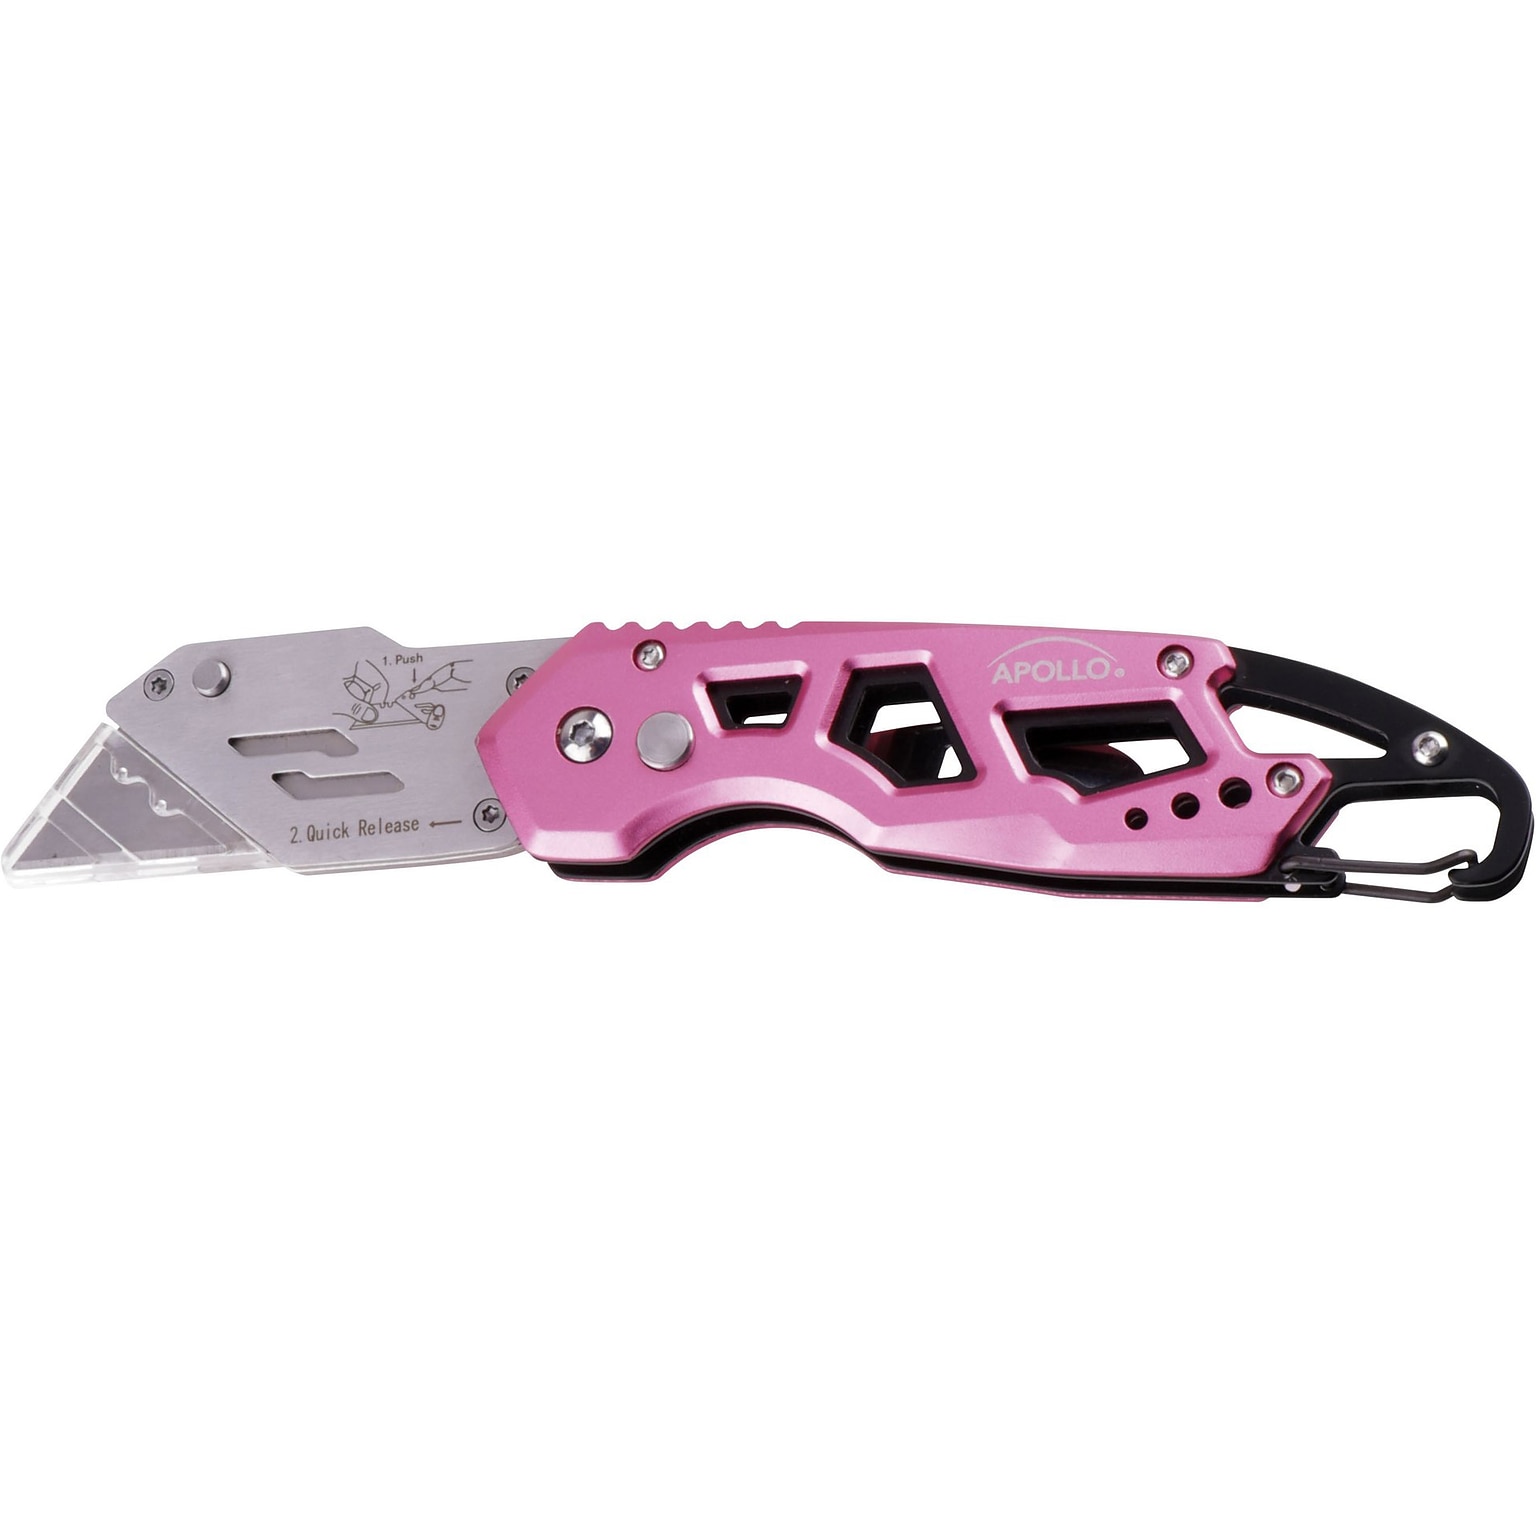 Apollo Tools Stainless Steel Foldable Utility Knife with Carabiner Clip and Fast-Change Blade (DT5017P)